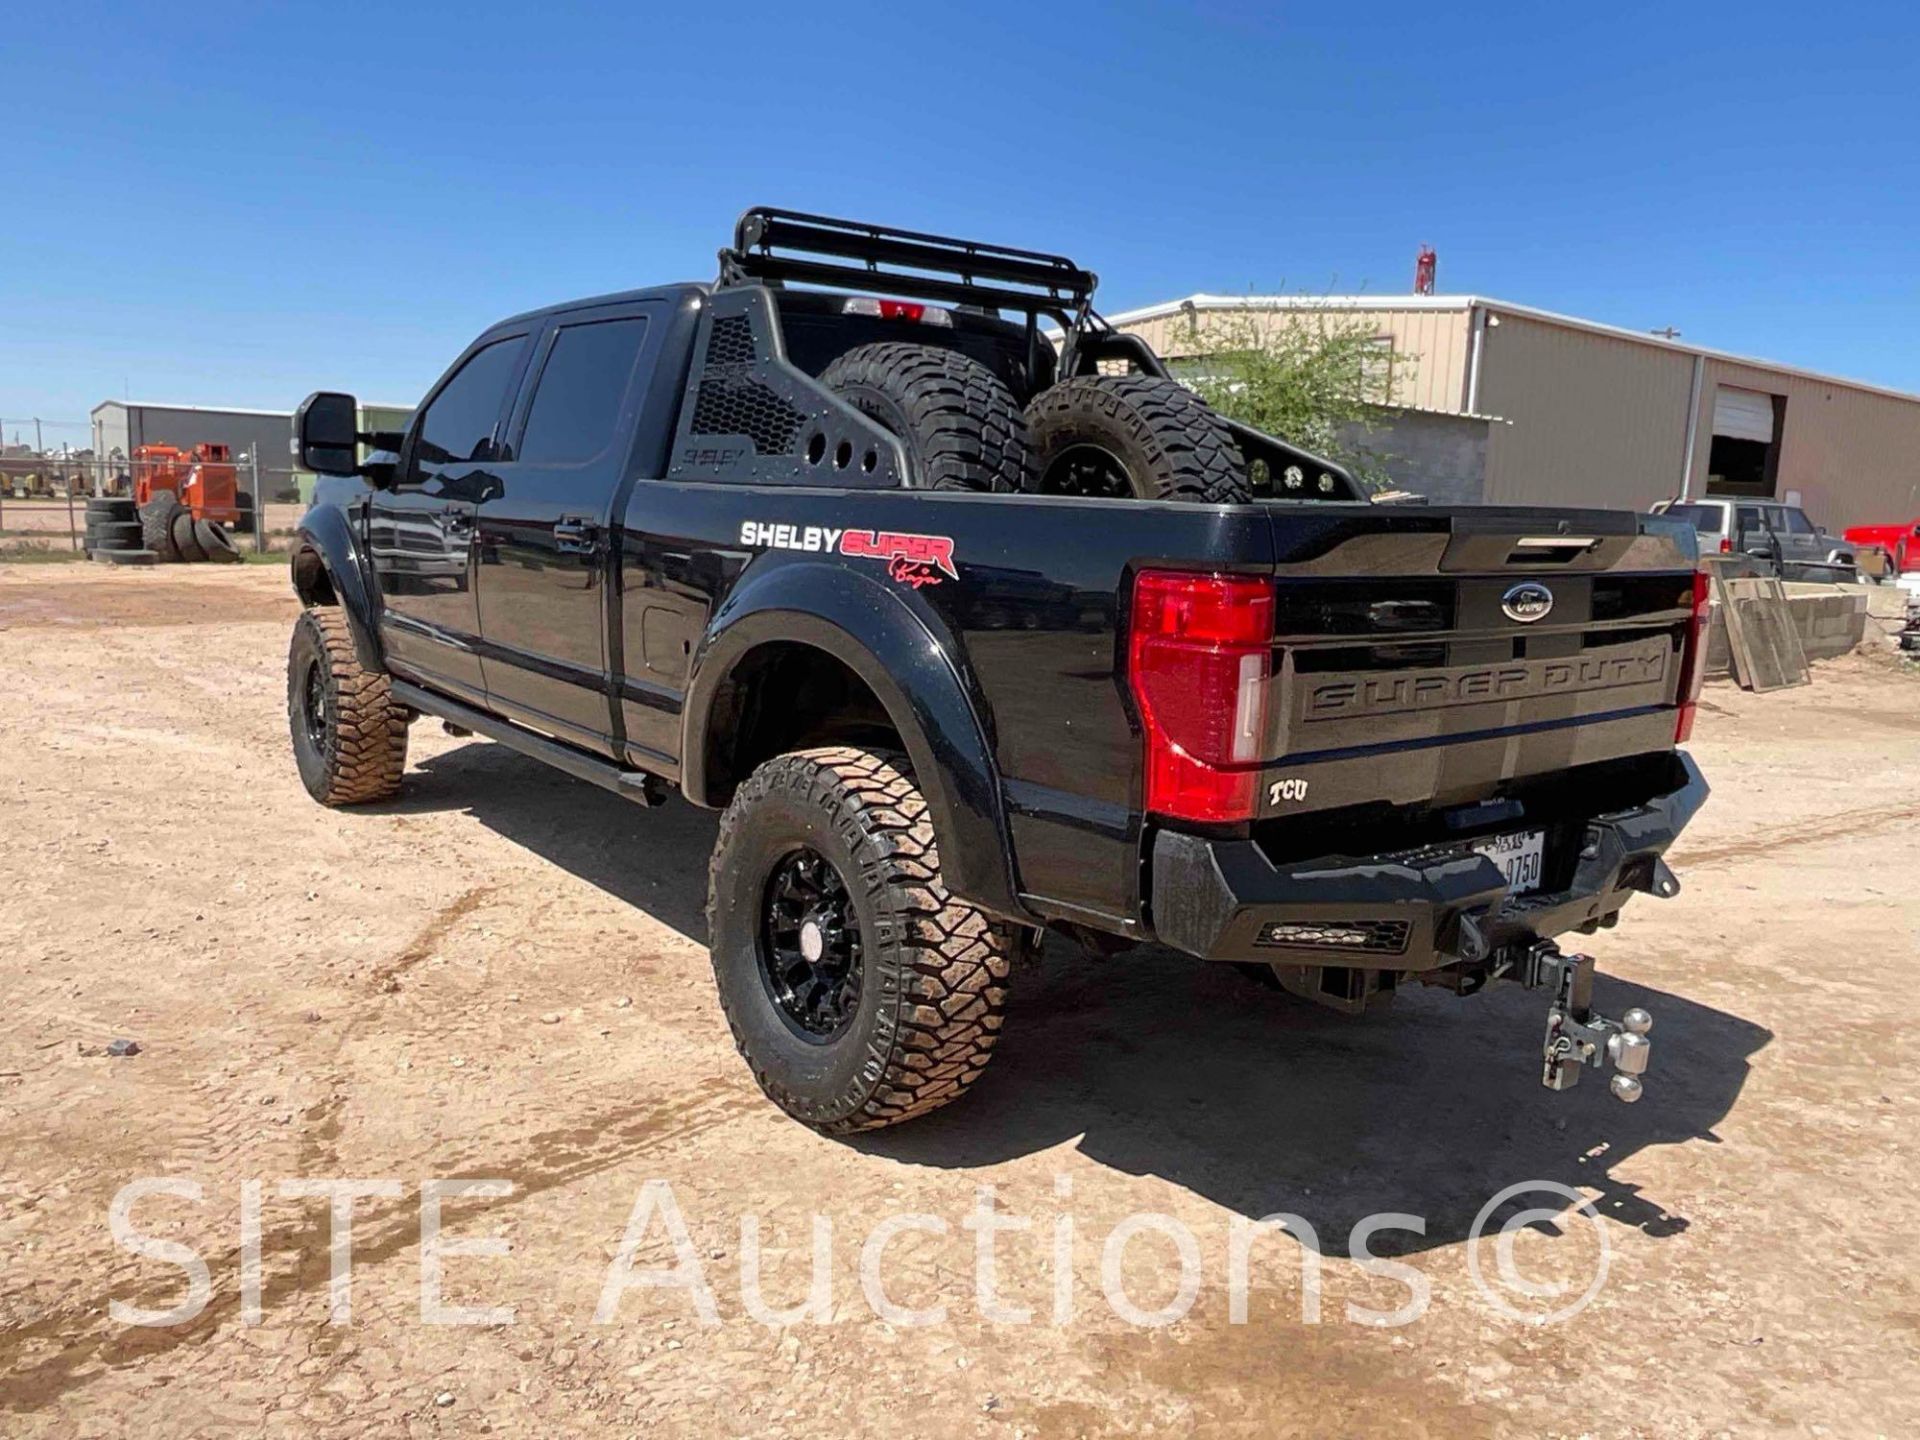 2021 Ford F250 SD Shelby Super Baja Crew Cab Pickup Truck - Image 7 of 24